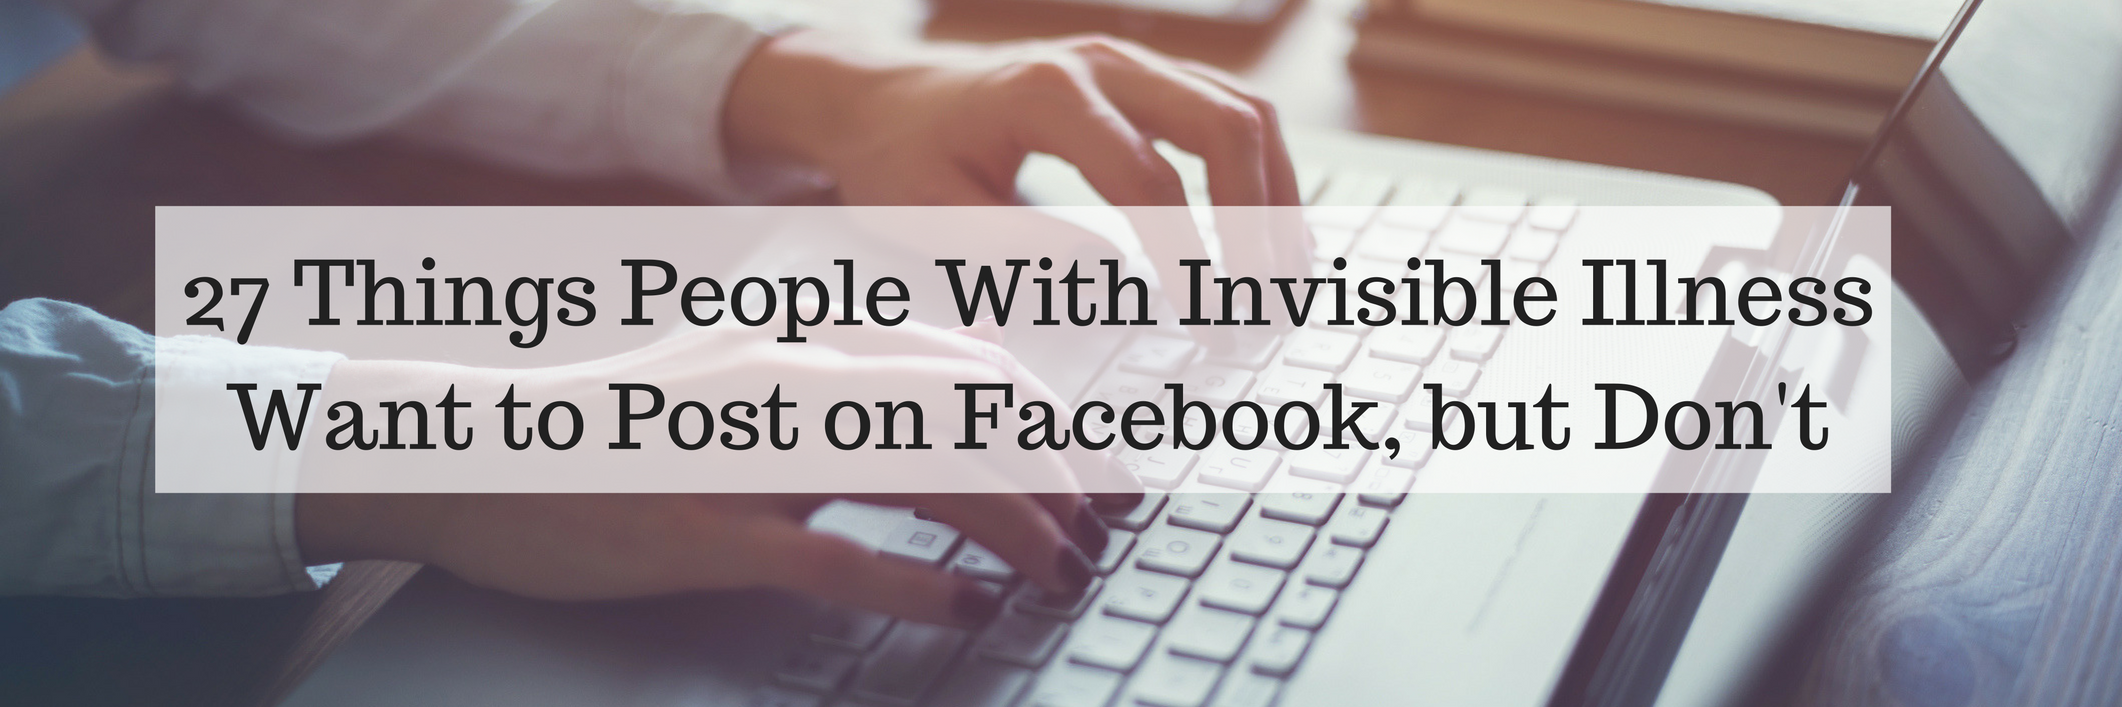 27 Things People With Invisible Illness Want to Post on Facebook, but Don't